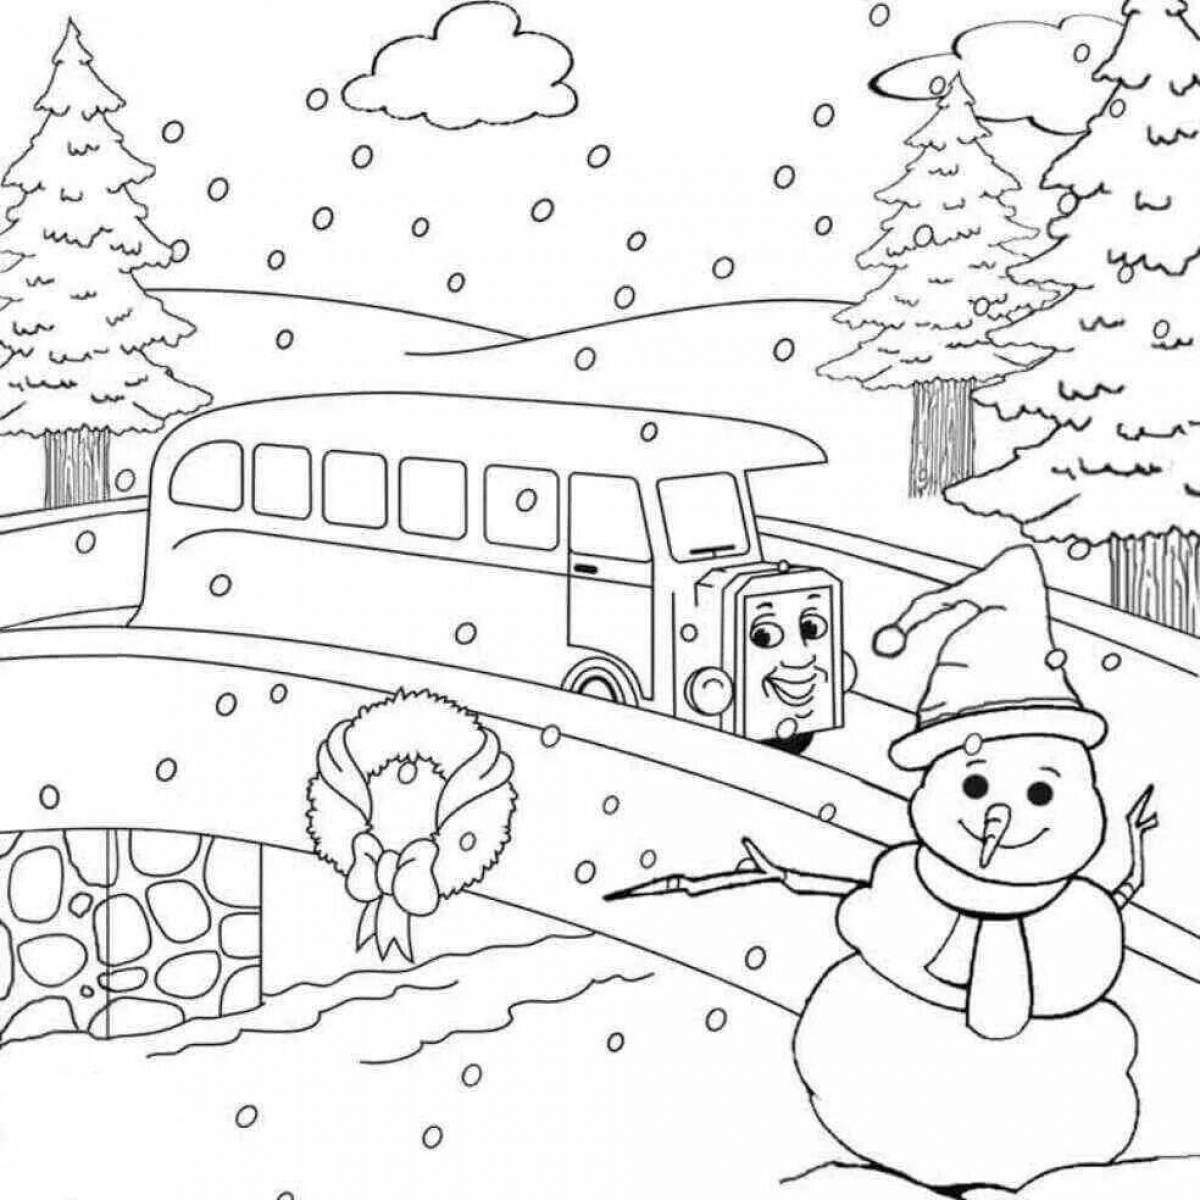 Charming winter night coloring